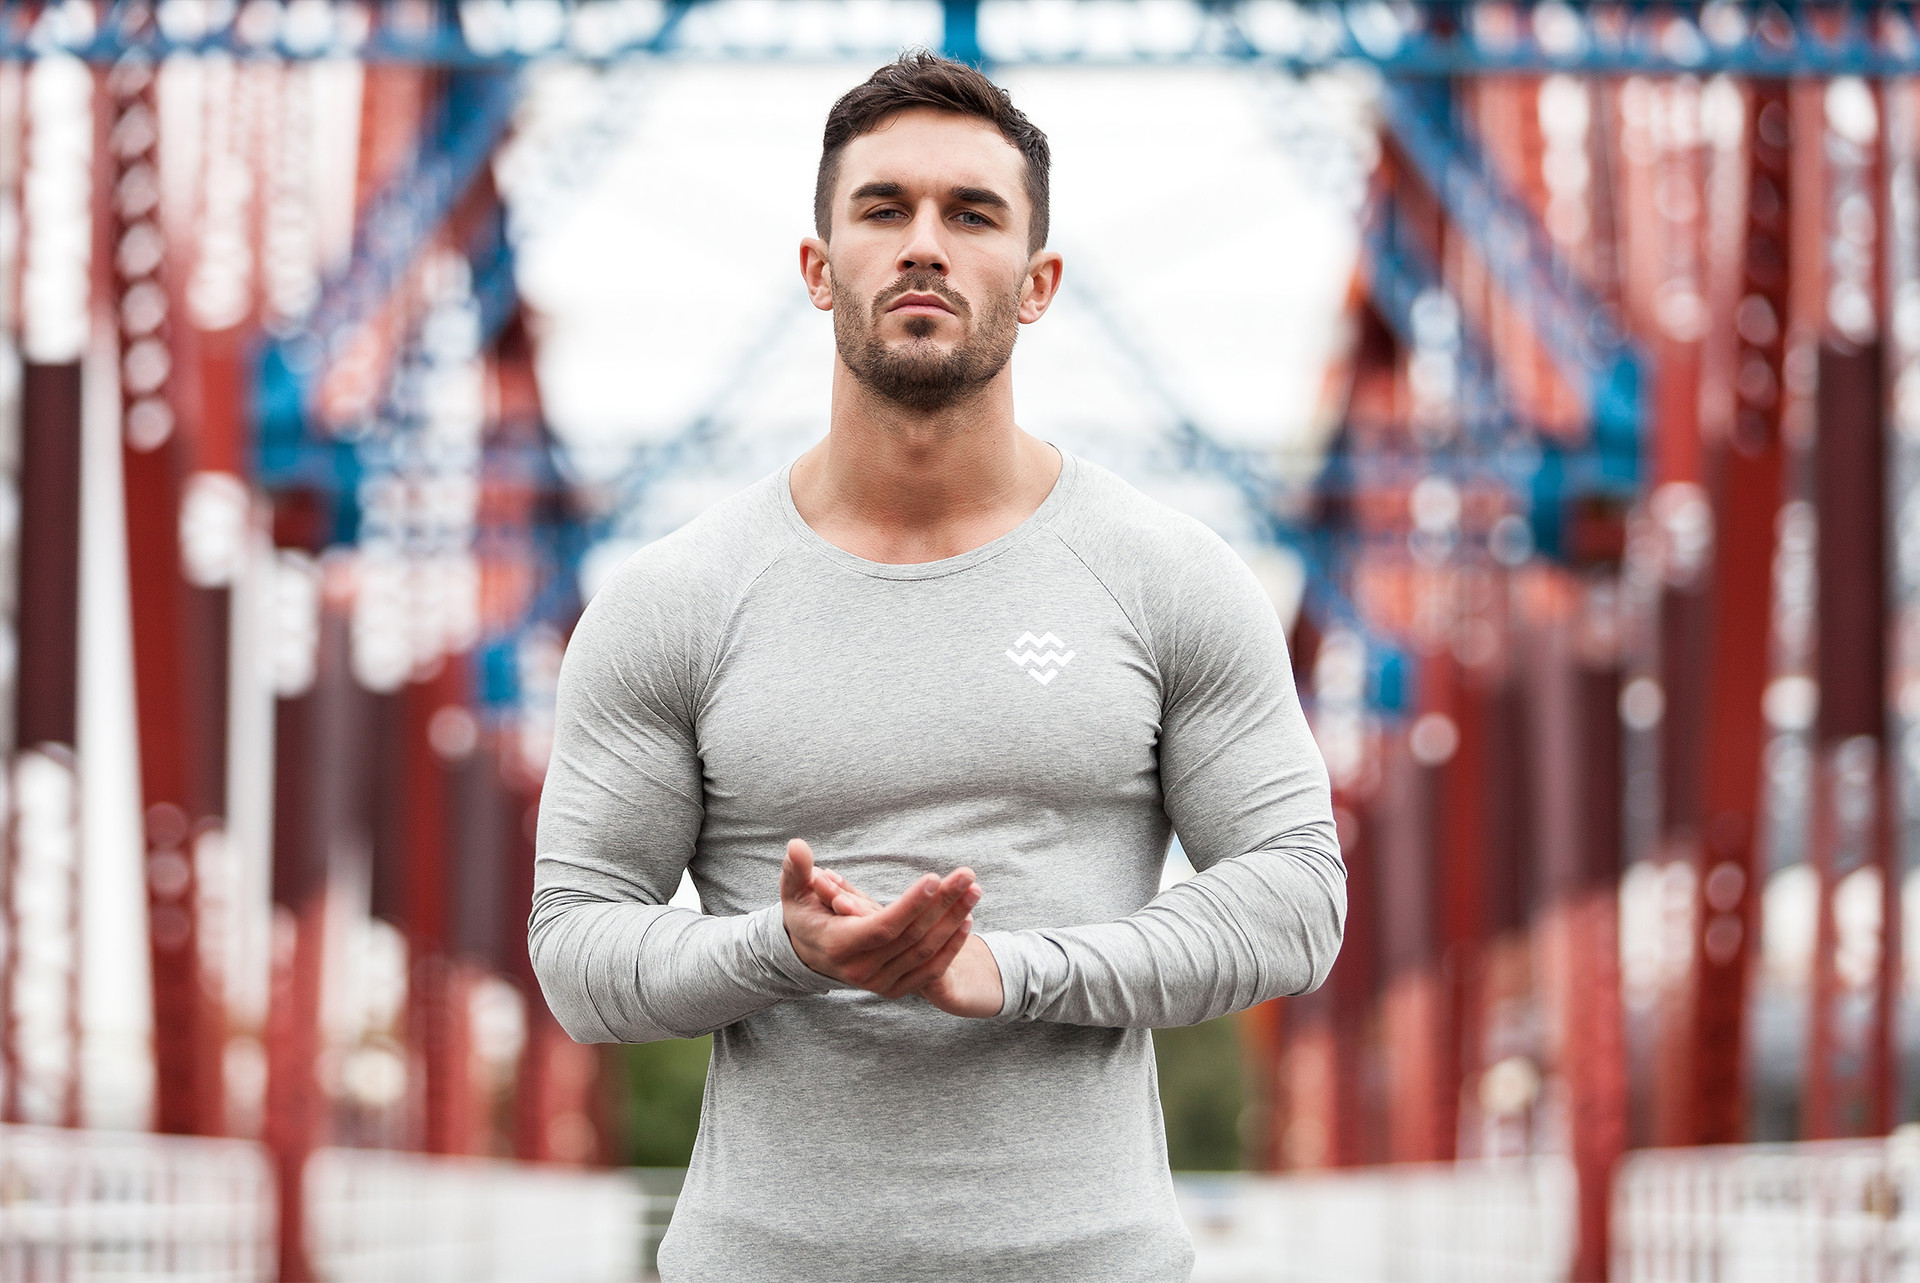 How To Choose The Best Clothing For Bodybuilding